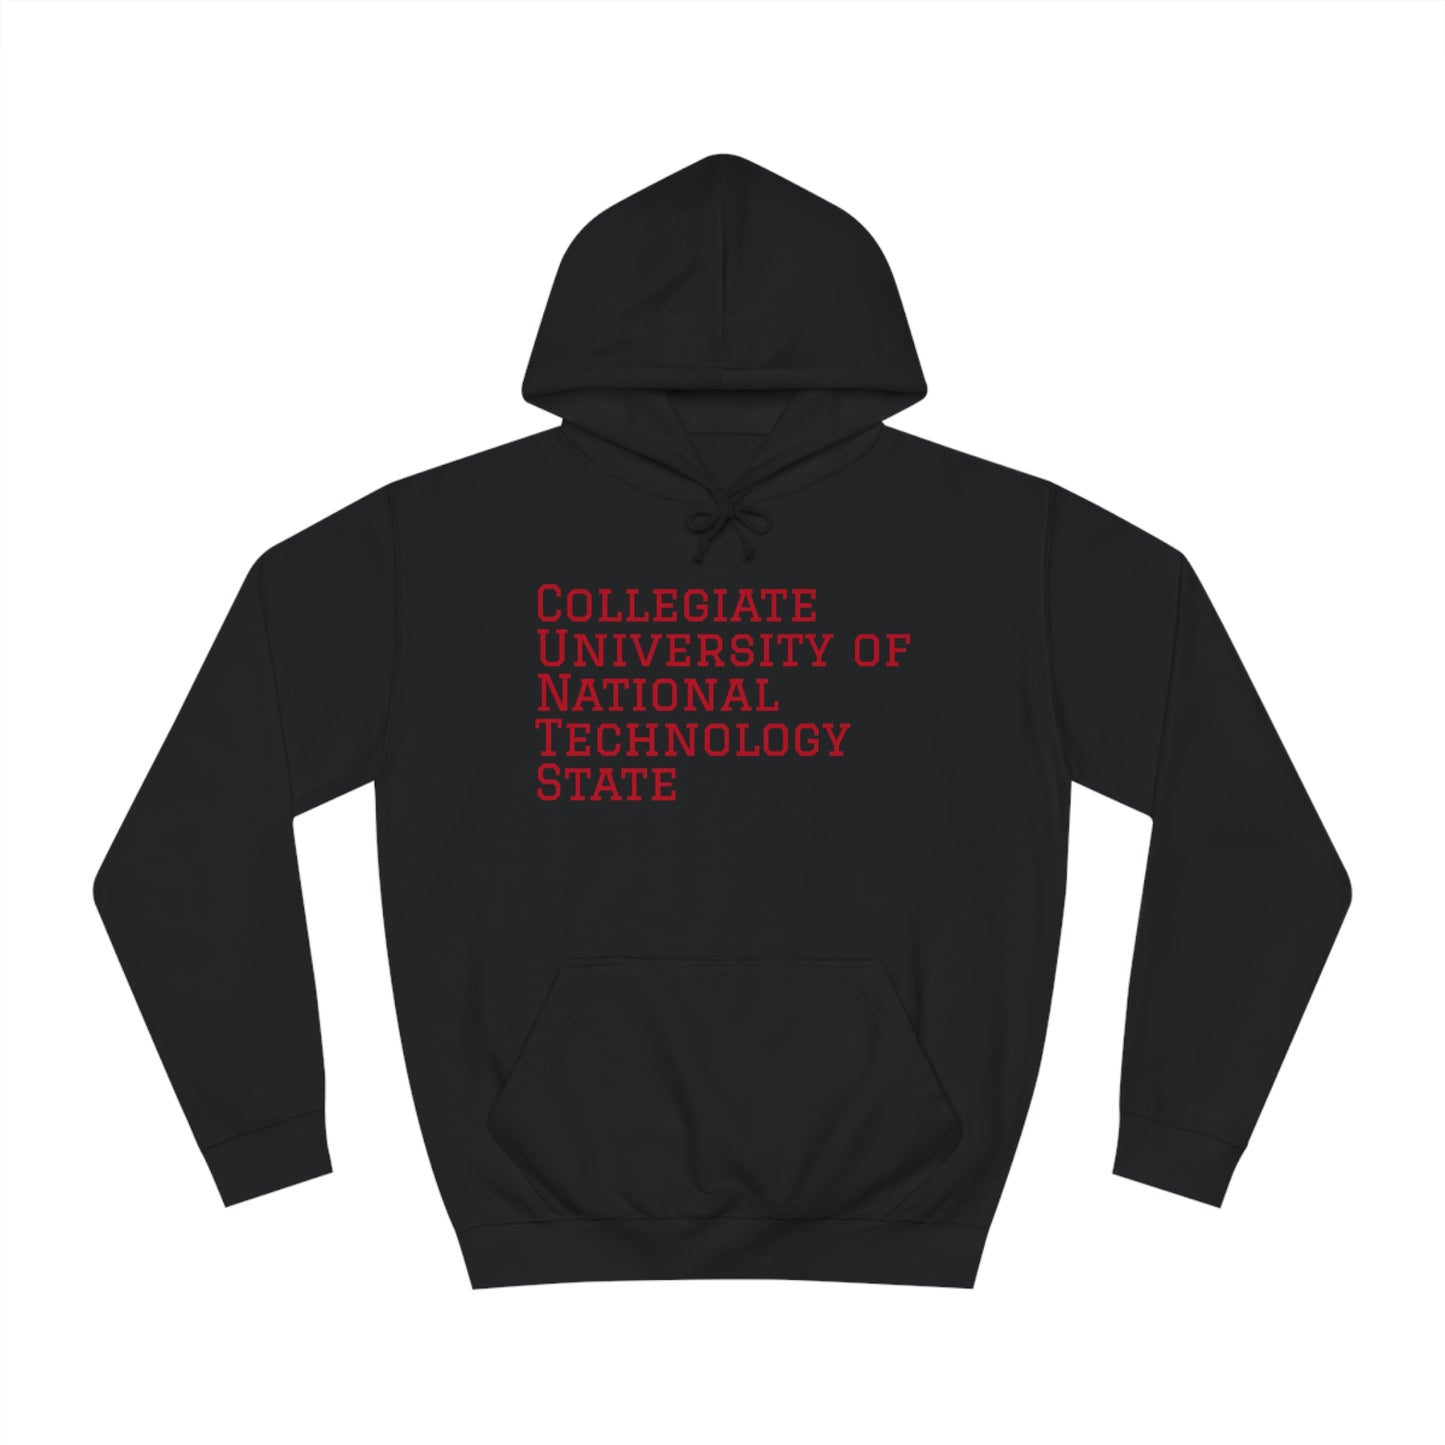 HMNS Podcast "State" Hoodie